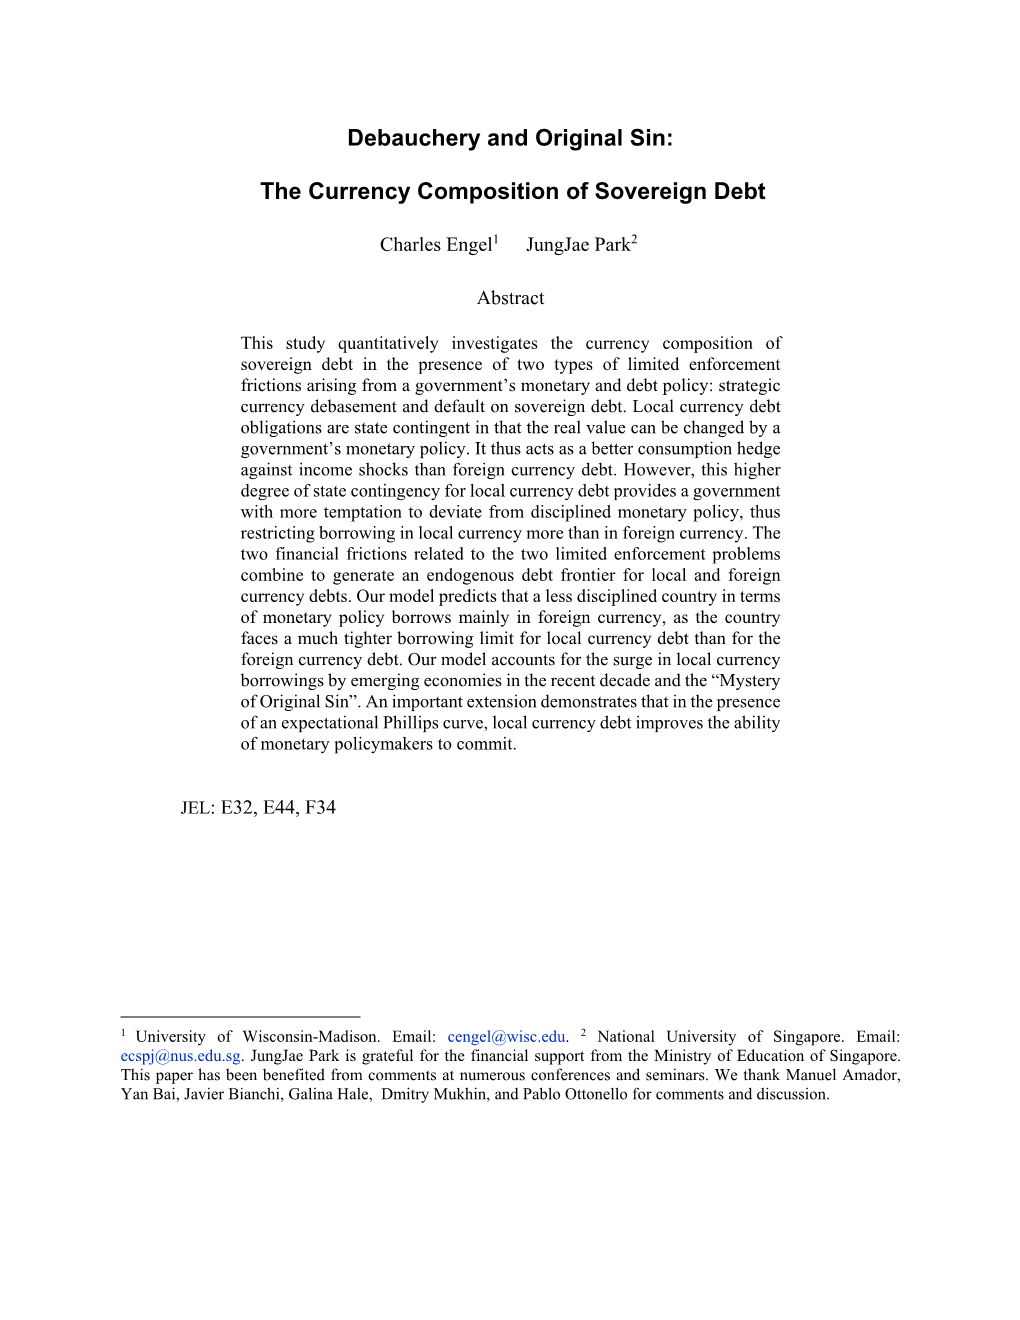 Debauchery and Original Sin: the Currency Composition of Sovereign